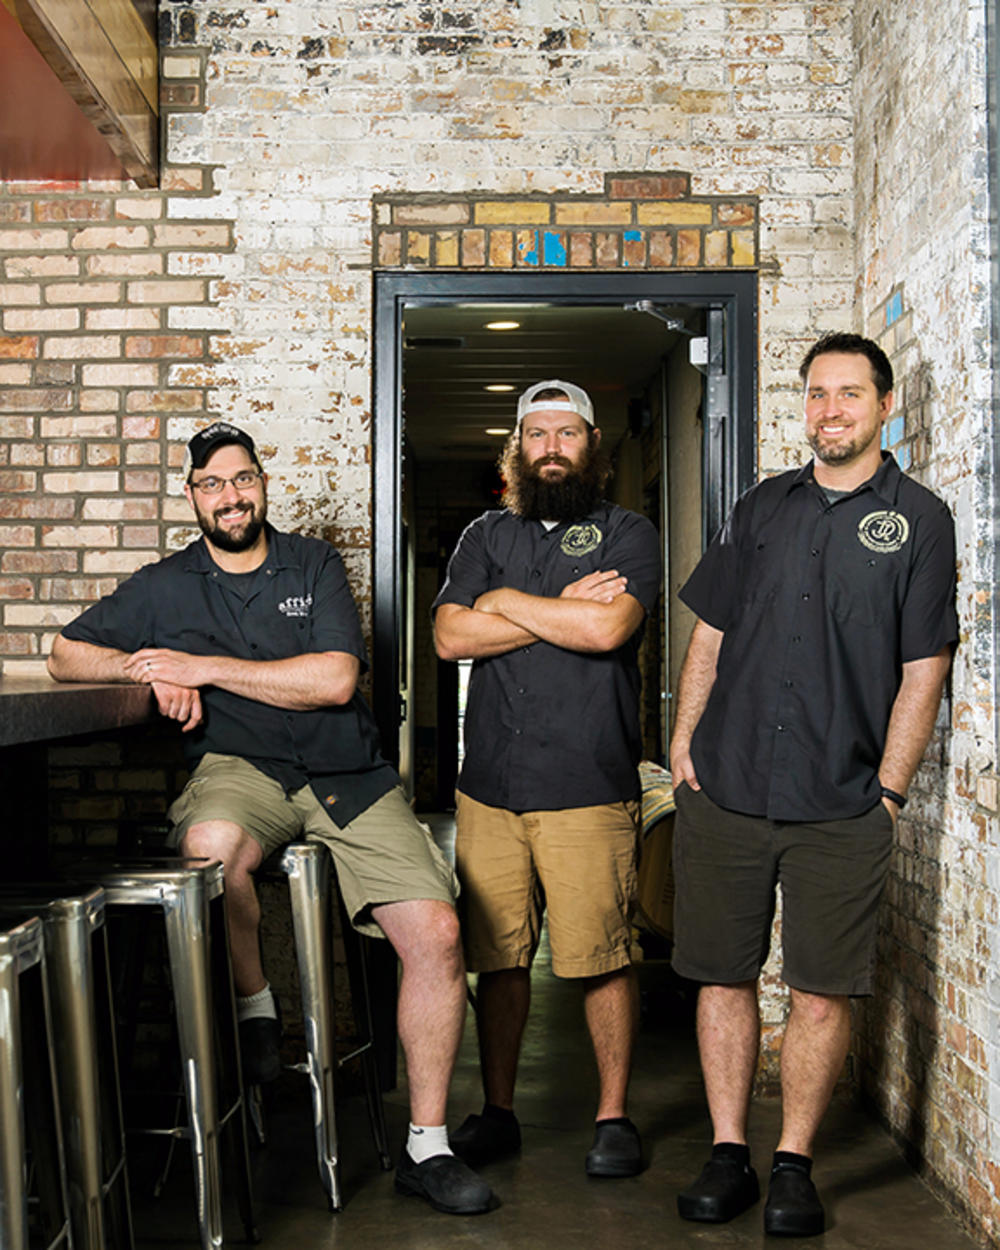 Junk Ditch Brewing Company Owners - Photo by Dustin McKibben for Fort Wayne Magazine